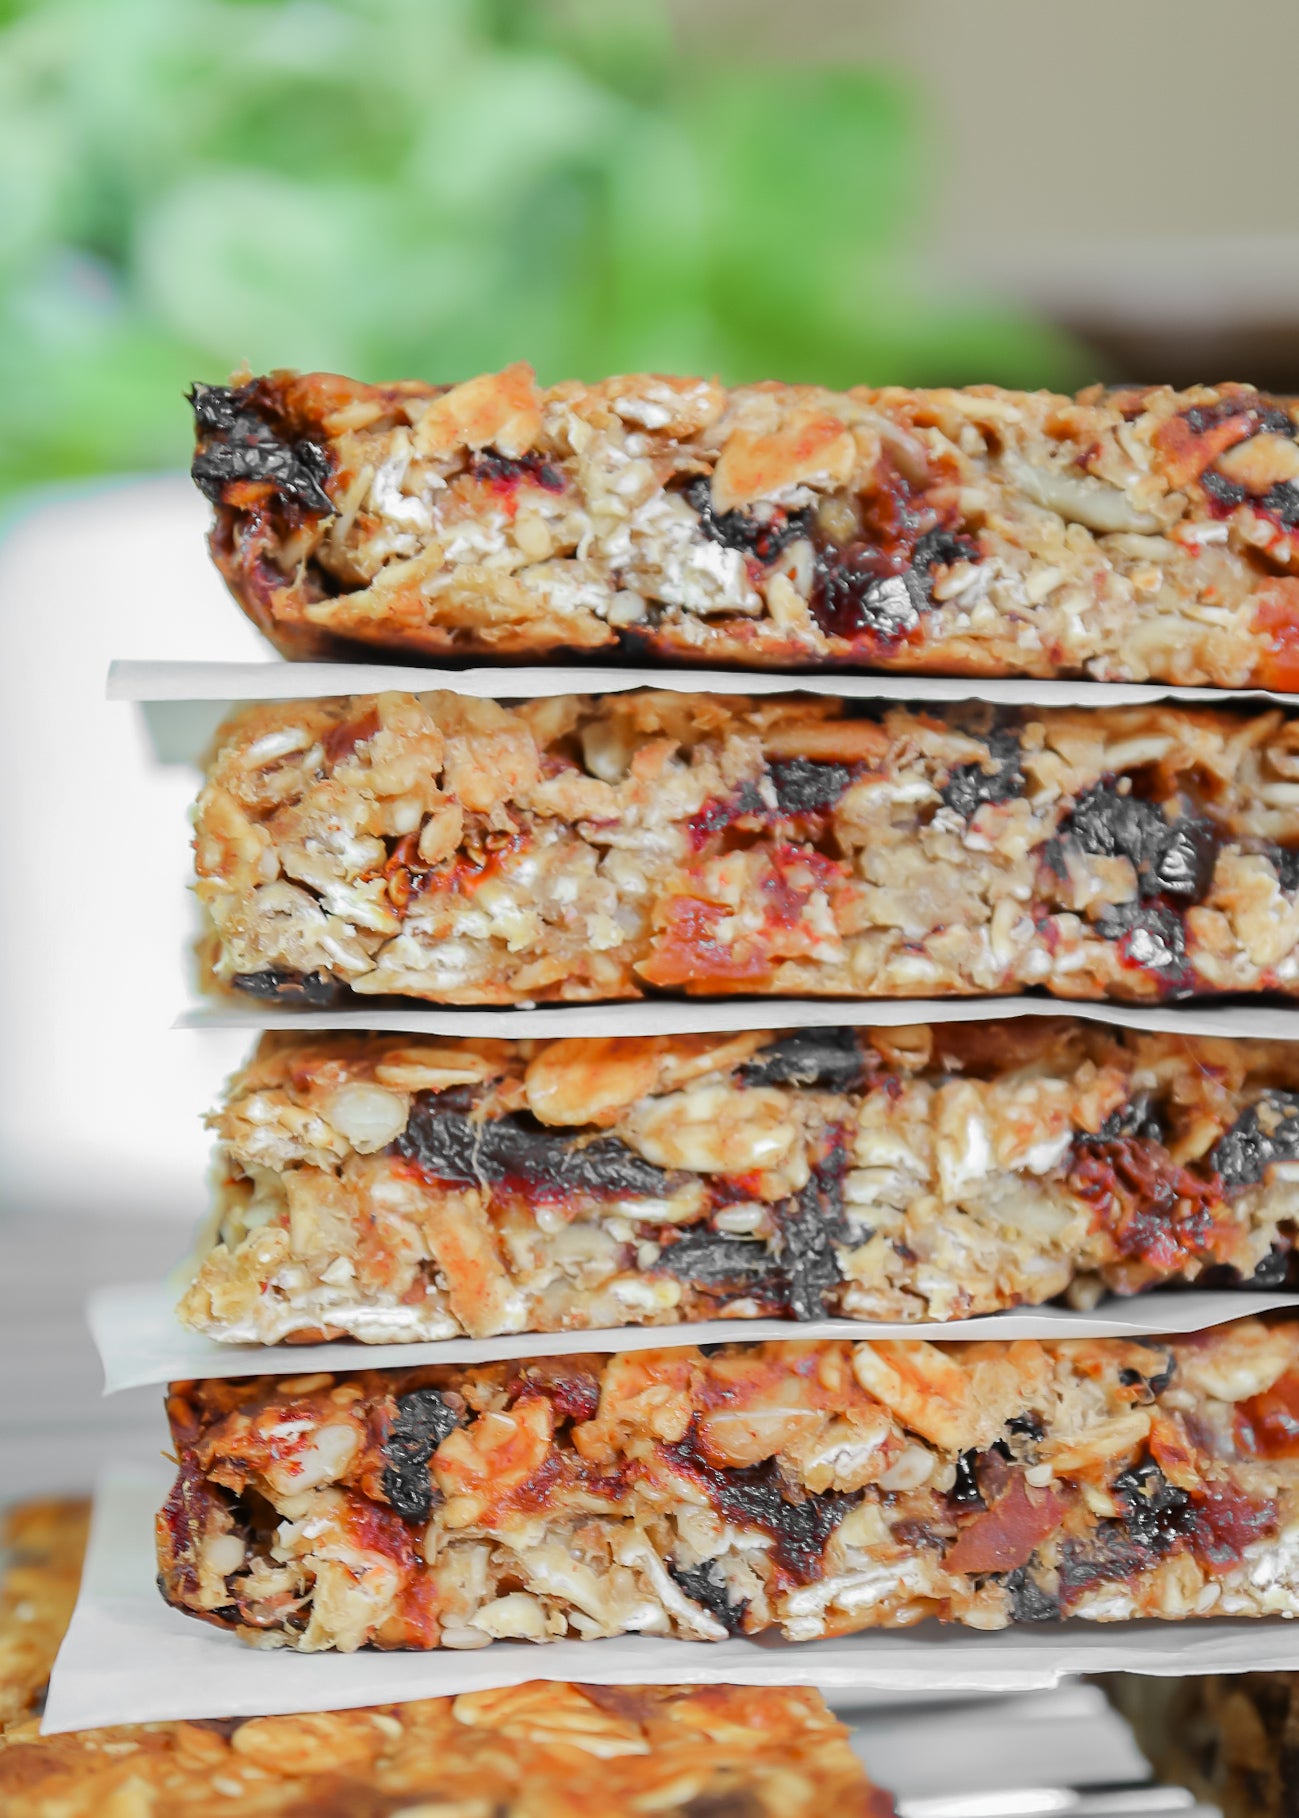 Superfood Fruit Granola Protein Bar (sugar-free sweetened with dates)